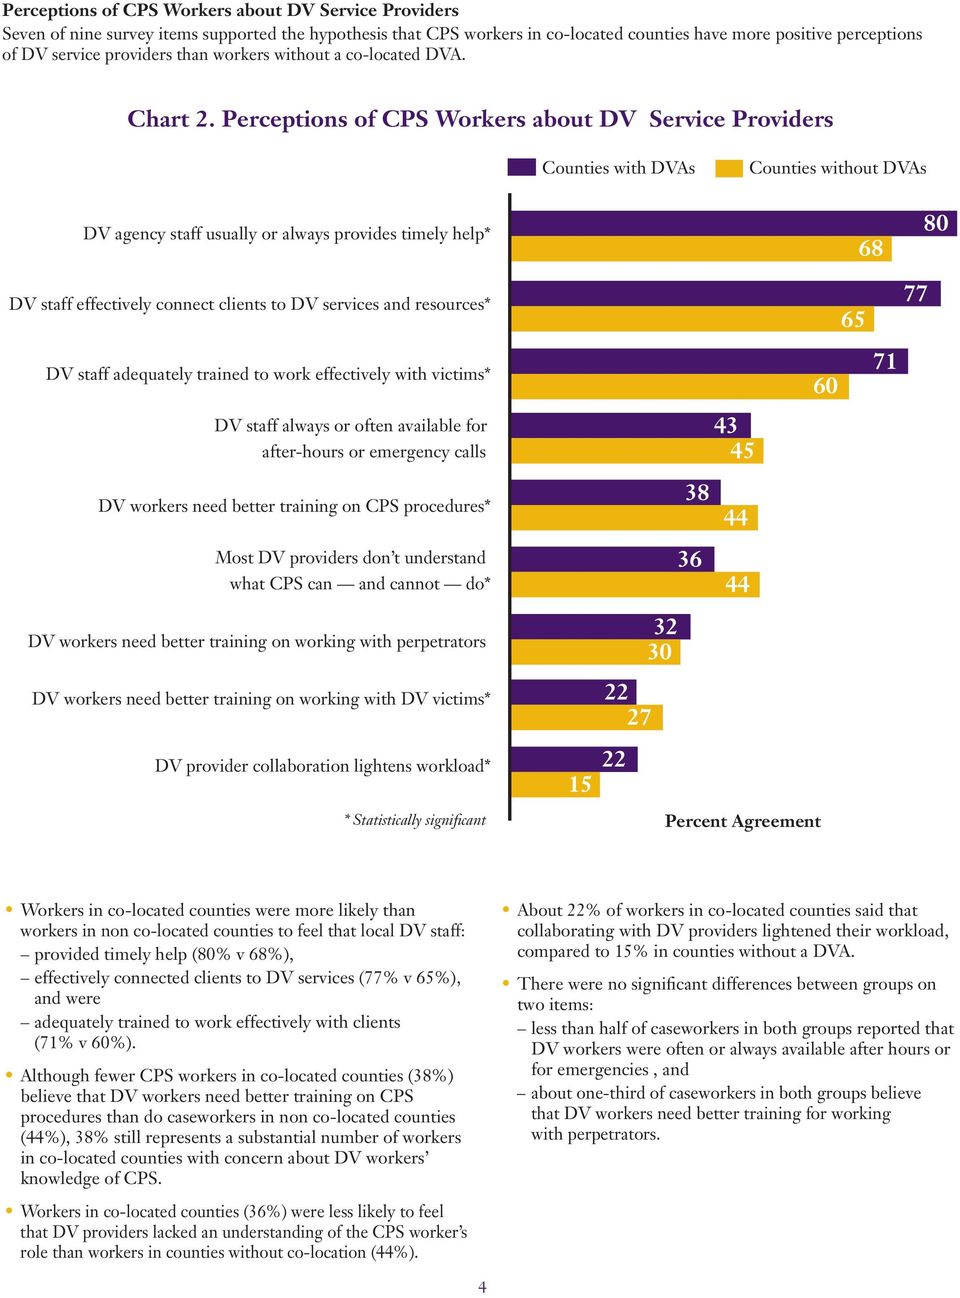 Perceptions of CPS Workers about DV Service Providers DV agency staff usually or always provides timely help* DV staff effectively connect clients to DV services and resources* 65 68 77 80 DV staff